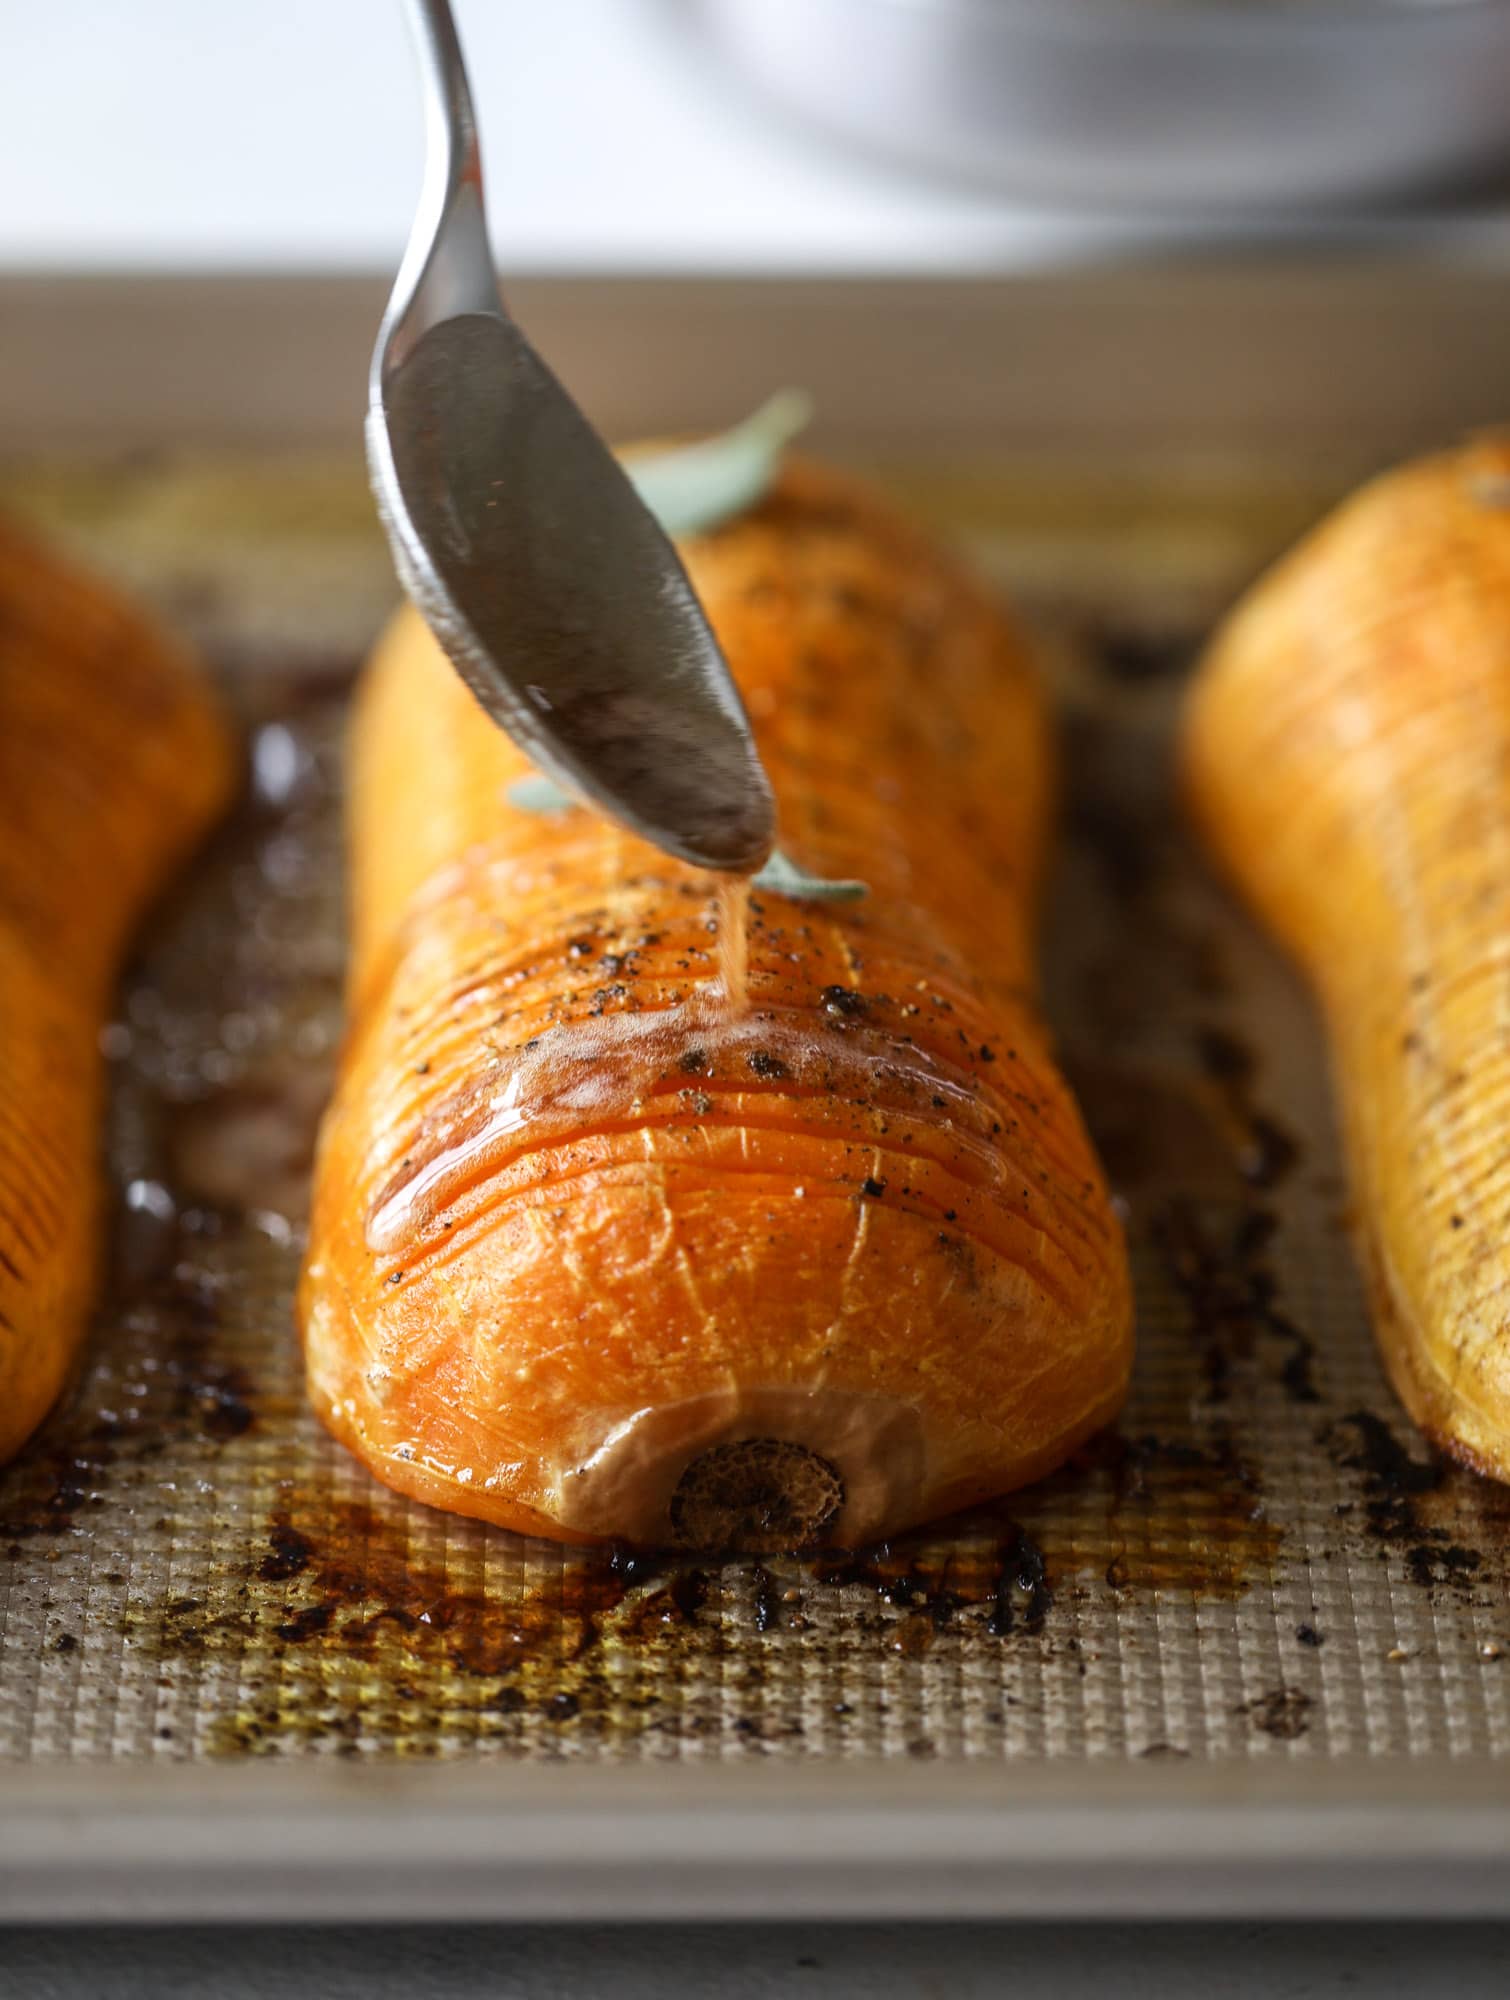 This hasselback butternut squash is perfect for Thanksgiving - and you can easily make it two ways! We have a maple pecan hassleback butternut squash and a brown butter sage hasselback butternut squash. Delicious! I howsweeteats.com #hasselback #butternutsquash